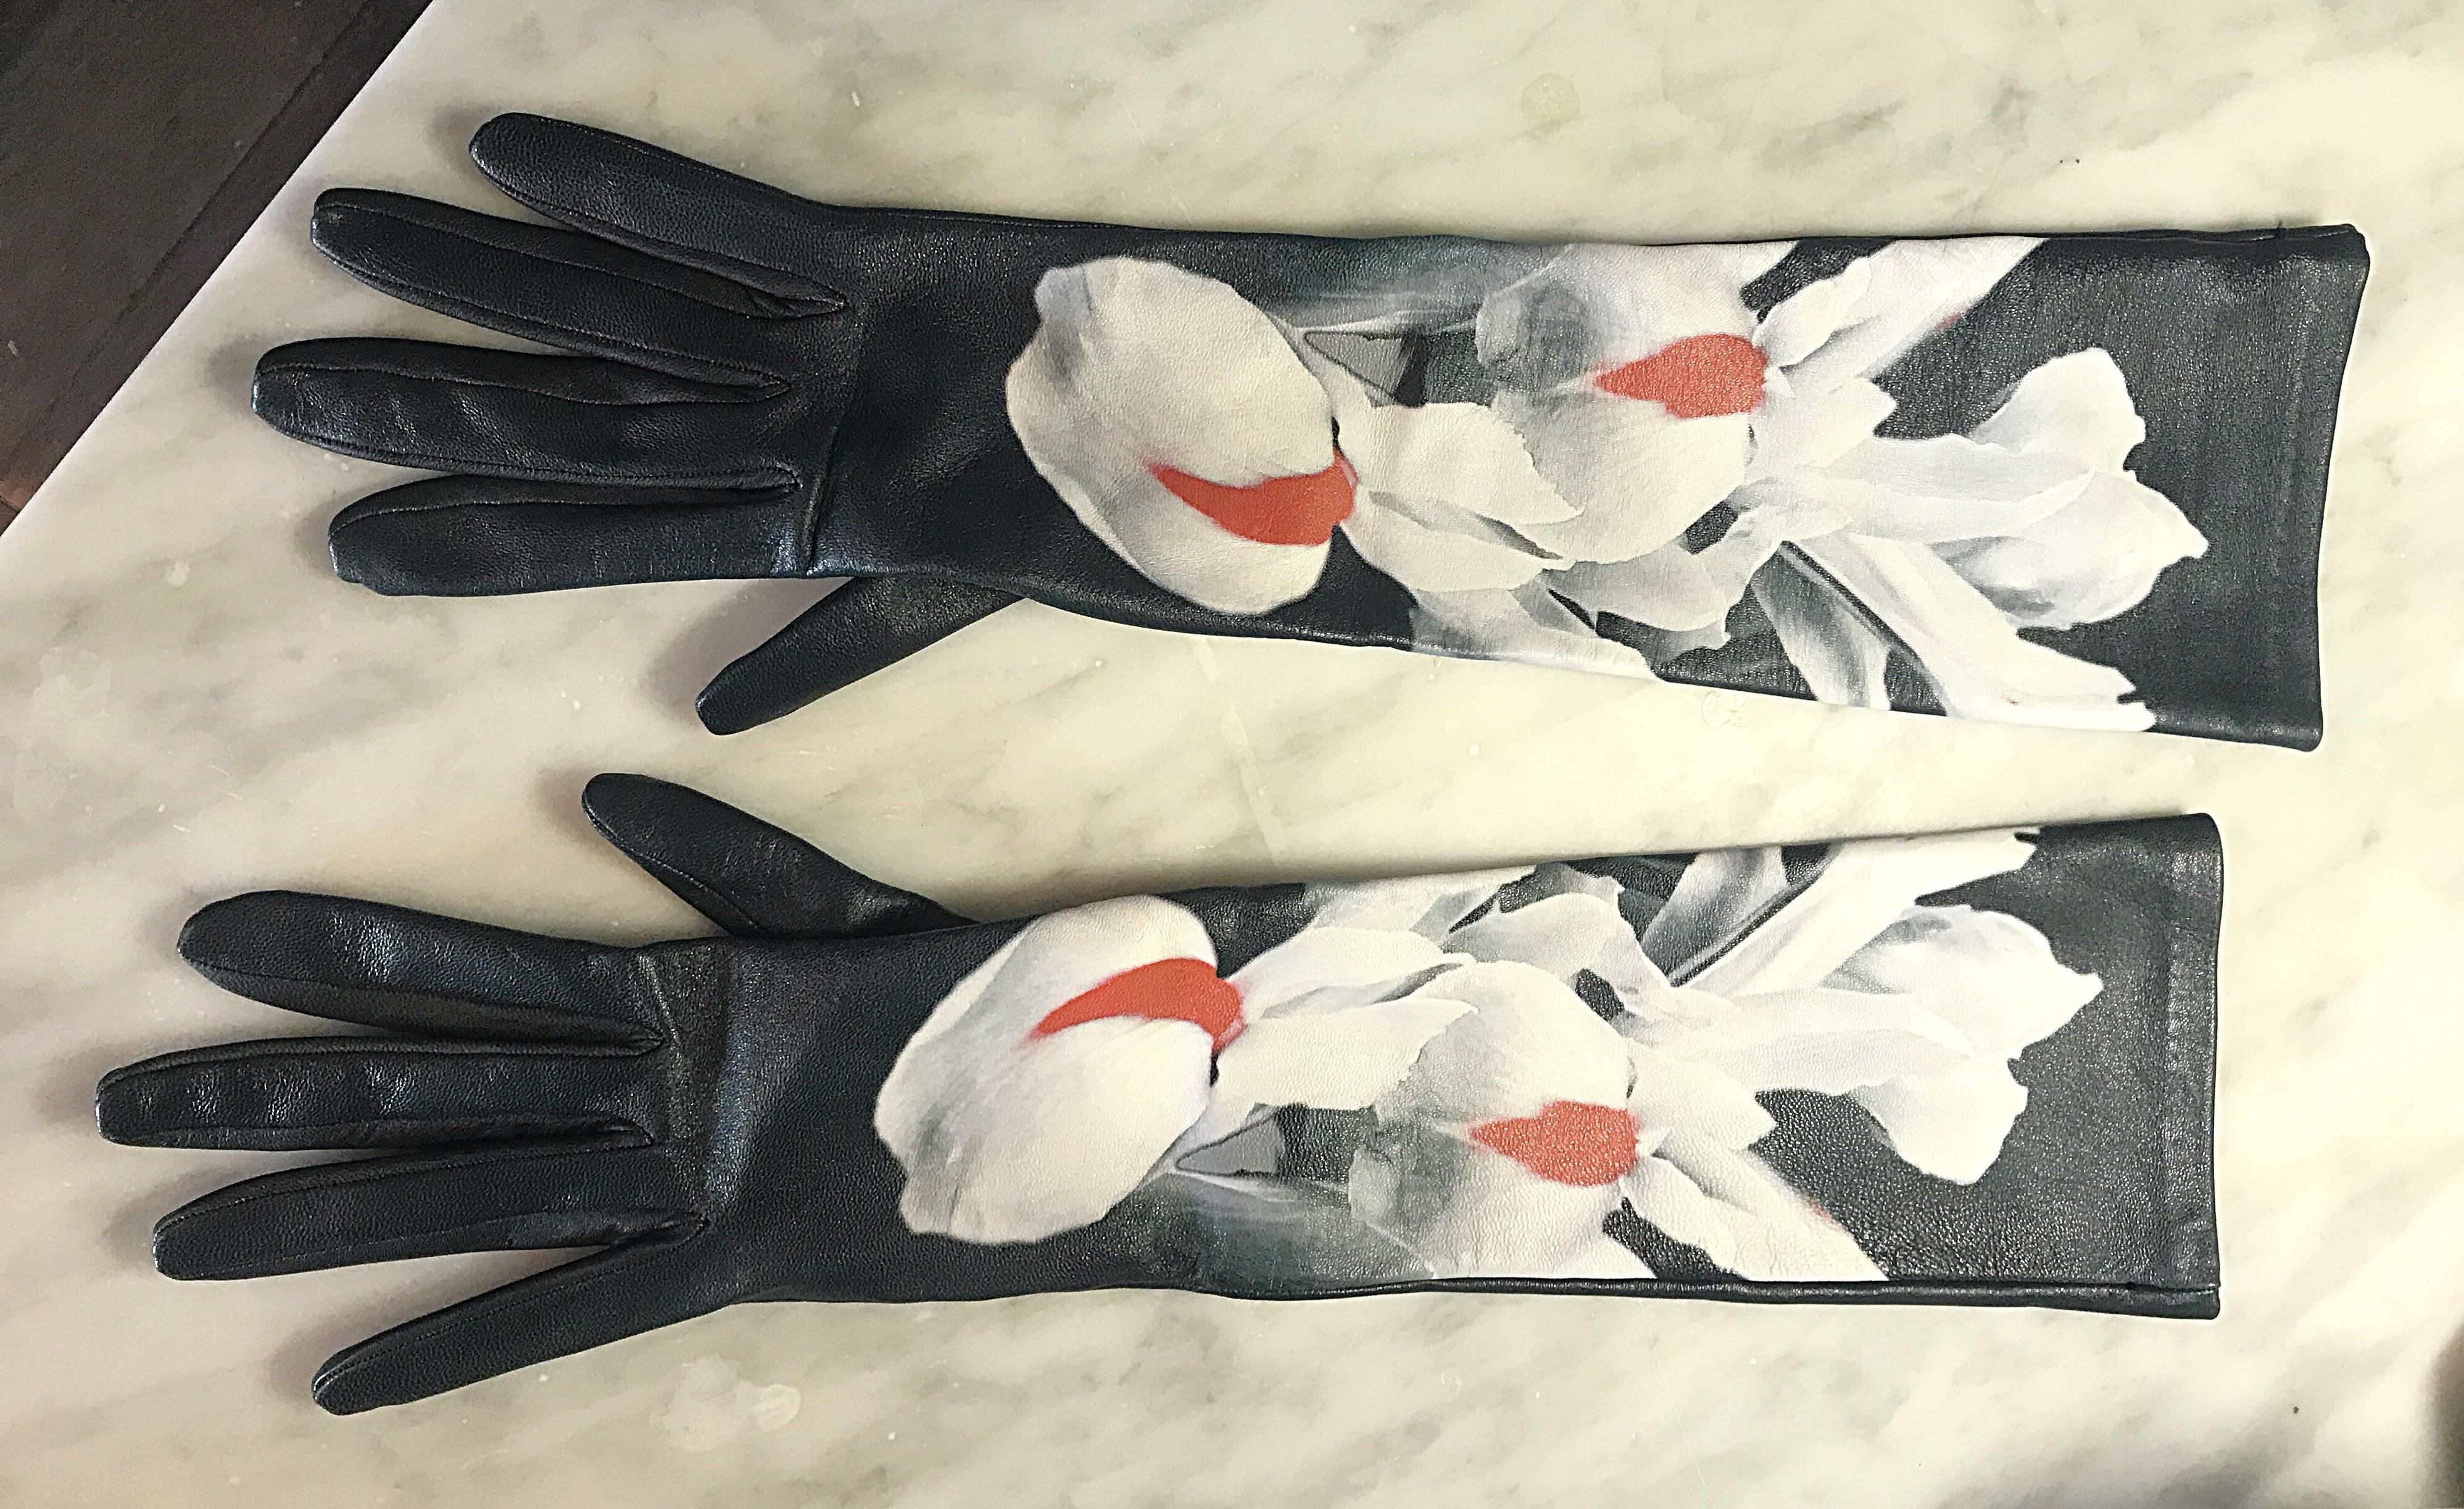 Rare brand new, with original Dior box and dust bag, limited edition CHRISTIAN DIOR, by RAF SIMONS Size 6.5 hand painted Lily flower elbow length leather gloves! For the Fall 2014 Dior line, RAF Simons interpretedDior's garden in six flower mixes